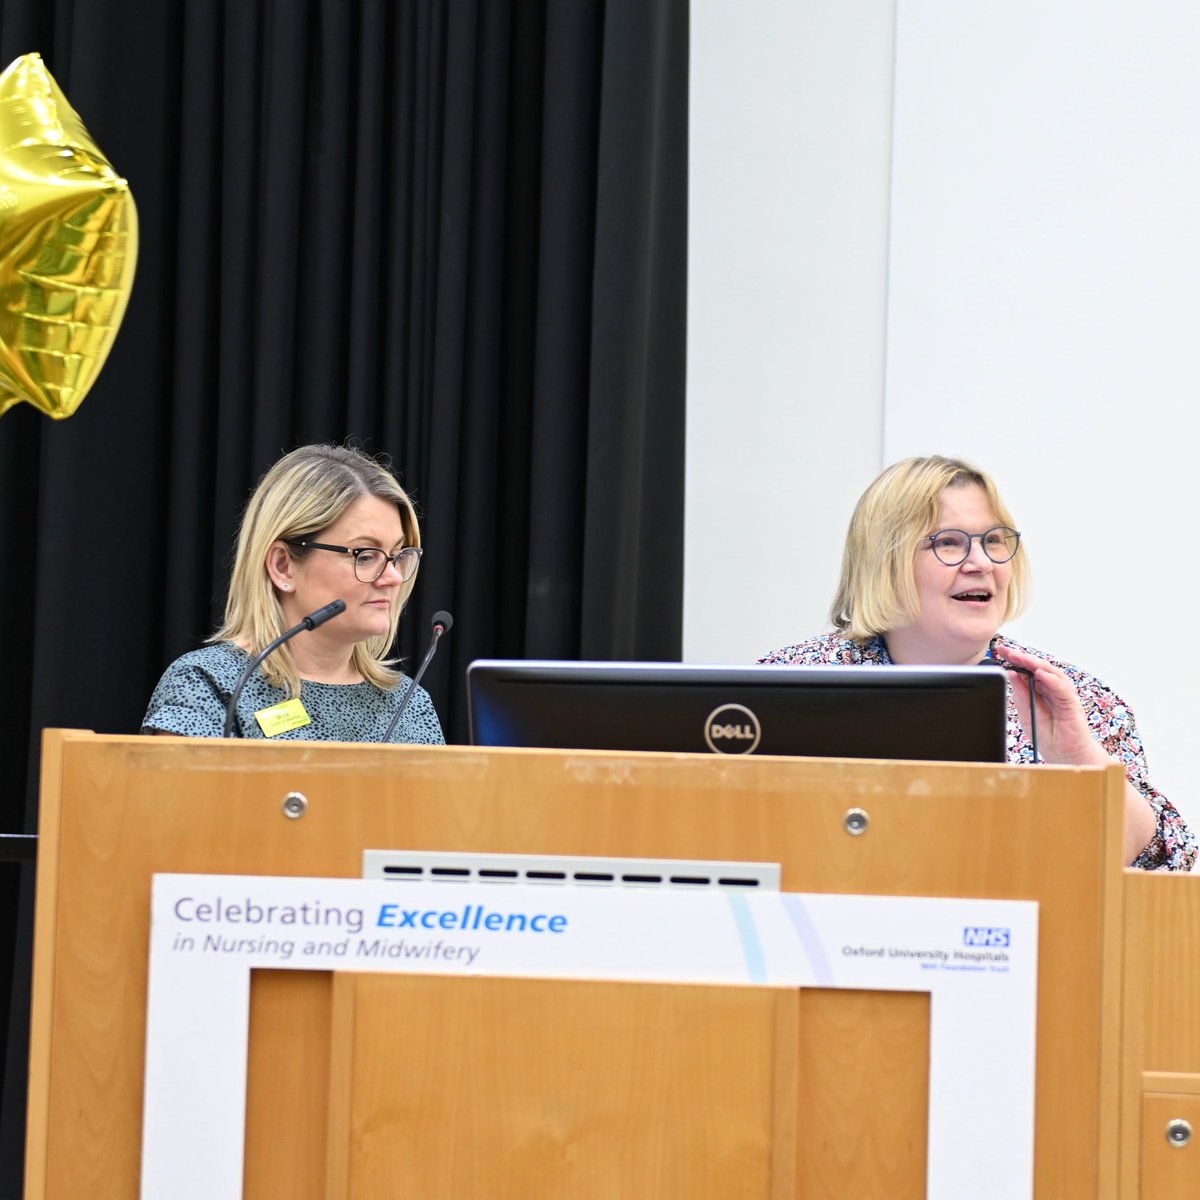 Yvonne Christley (Chief Nursing Officer) and Milica Redfearn (Director of Midwifery) welcomed and thanked our Nurses, Midwives and Allied Health Professionals (NMAHP) for the care, support, and commitment they deliver to our patients and each other, in their opening addresses.